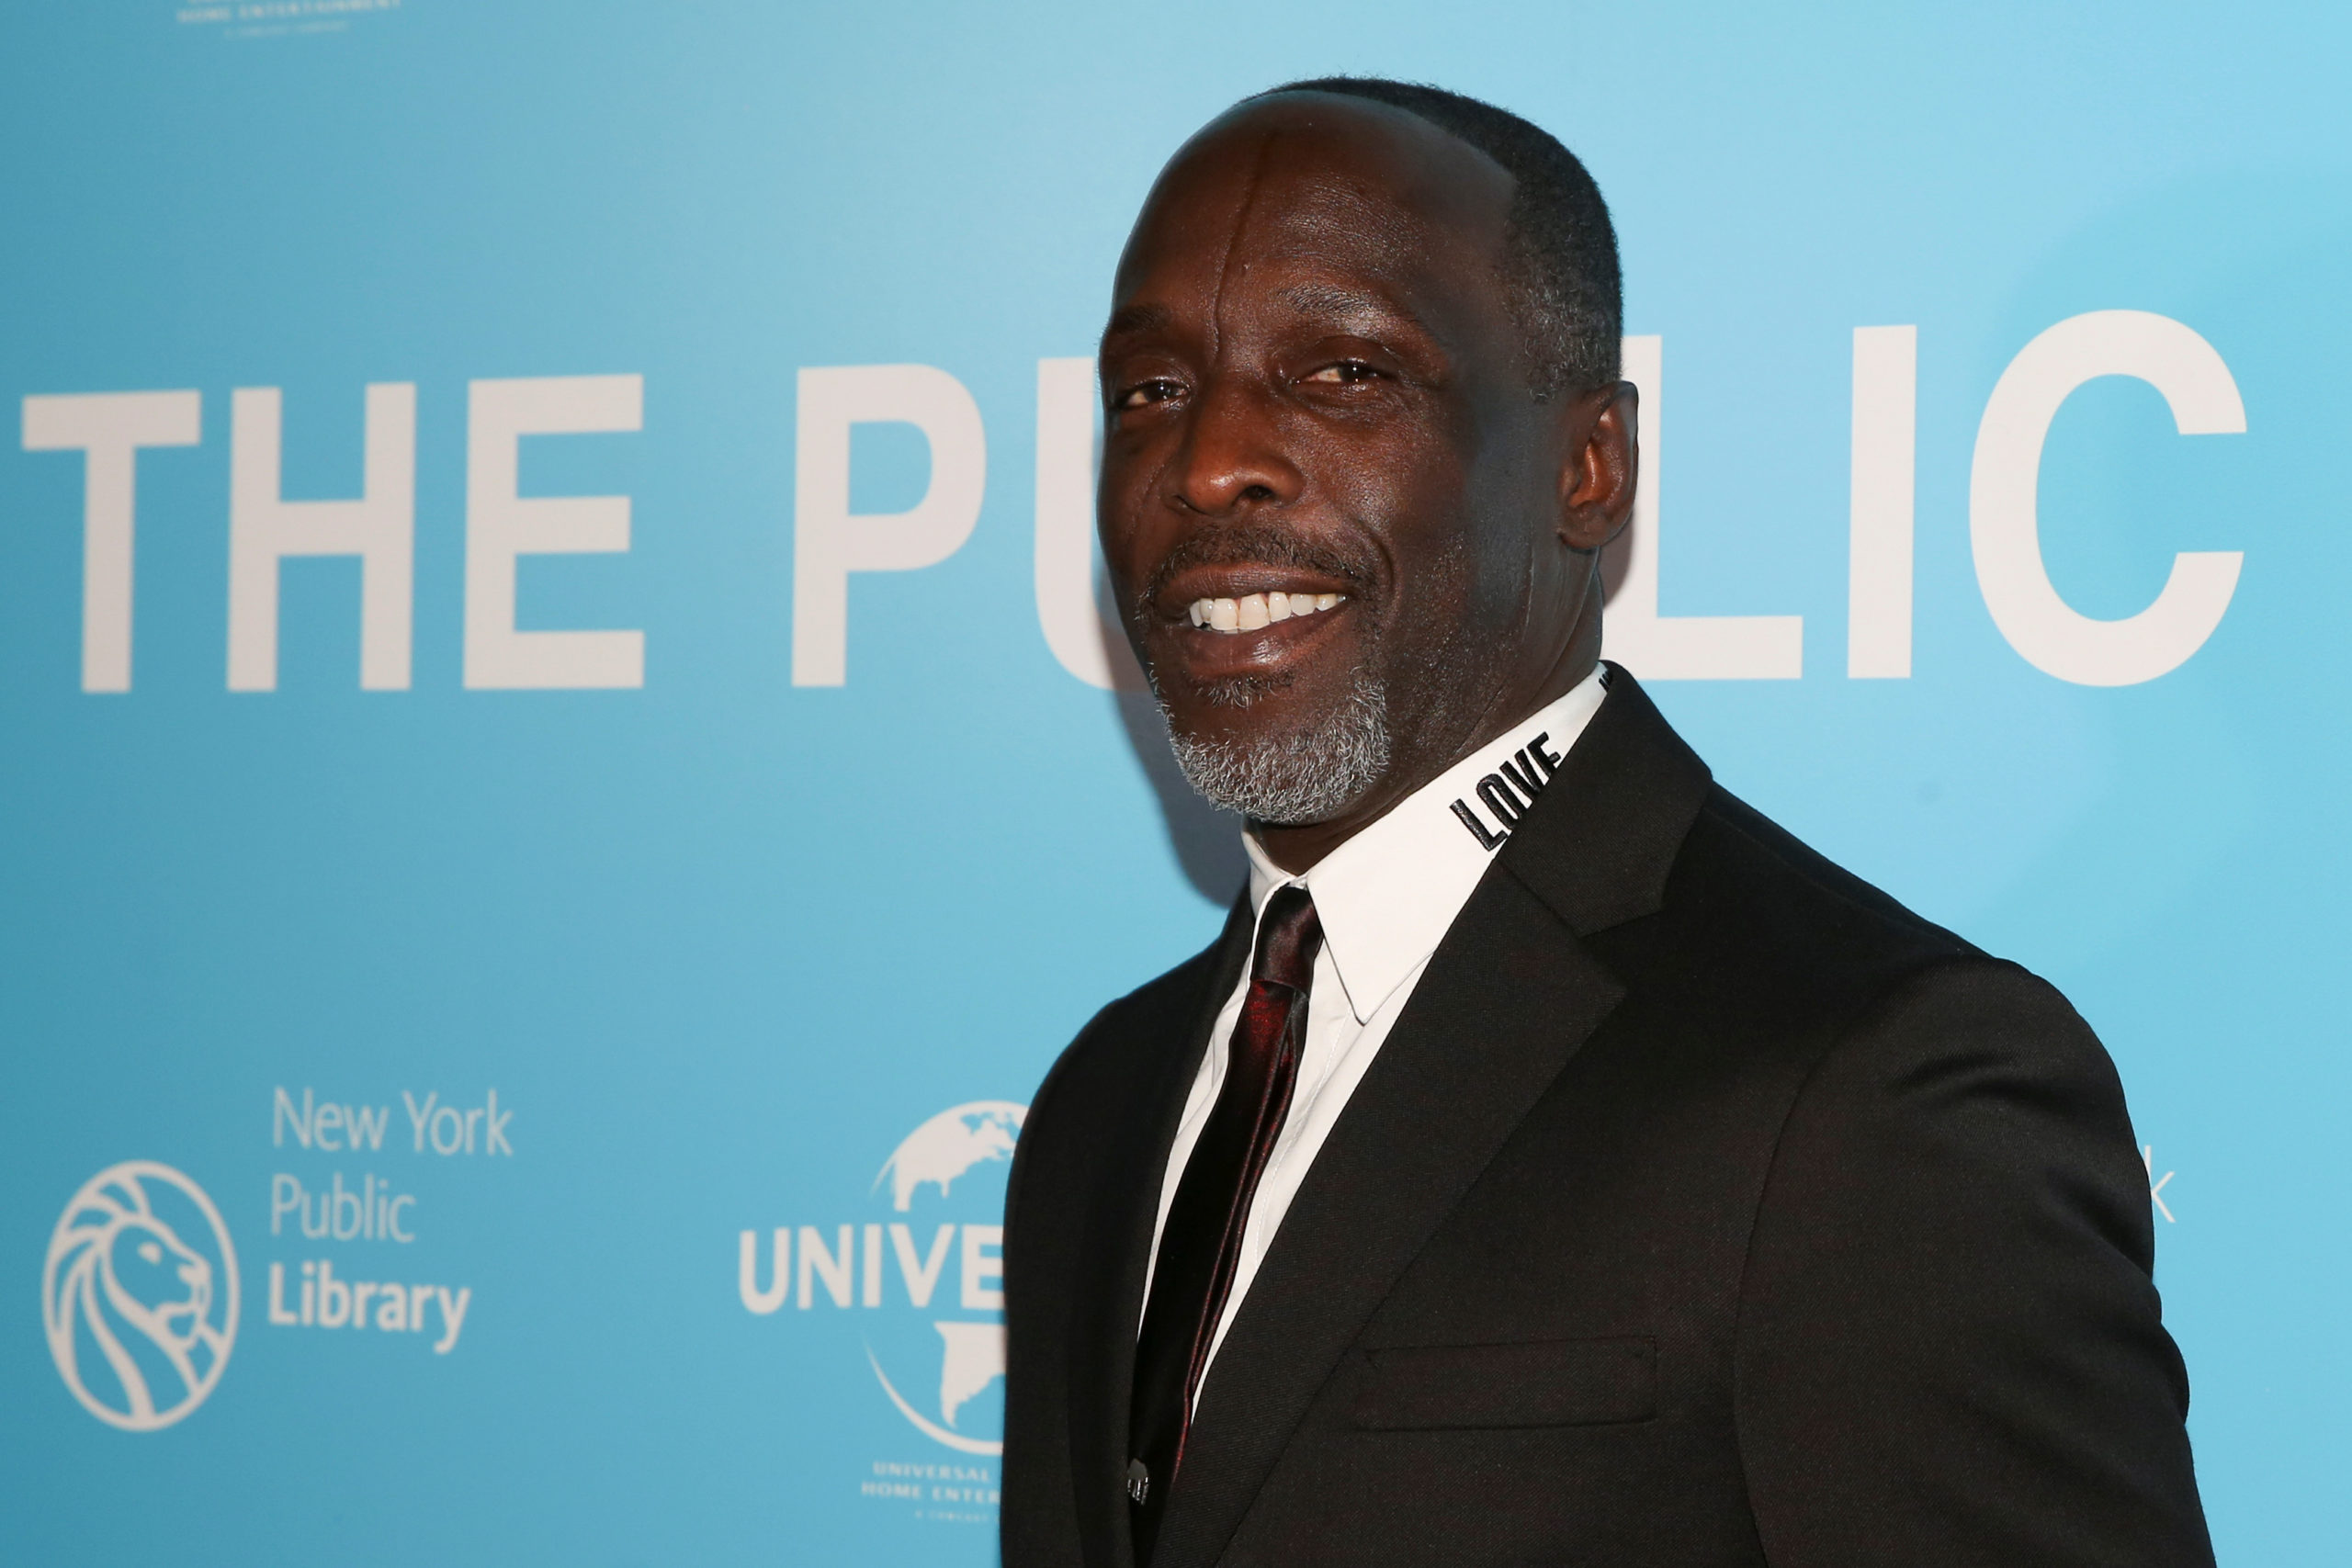 Michael K Williams arrives for the premiere of "The Public" at the New York Public Library in New York, U.S., April 1, 2019. REUTERS/Caitlin Ochs